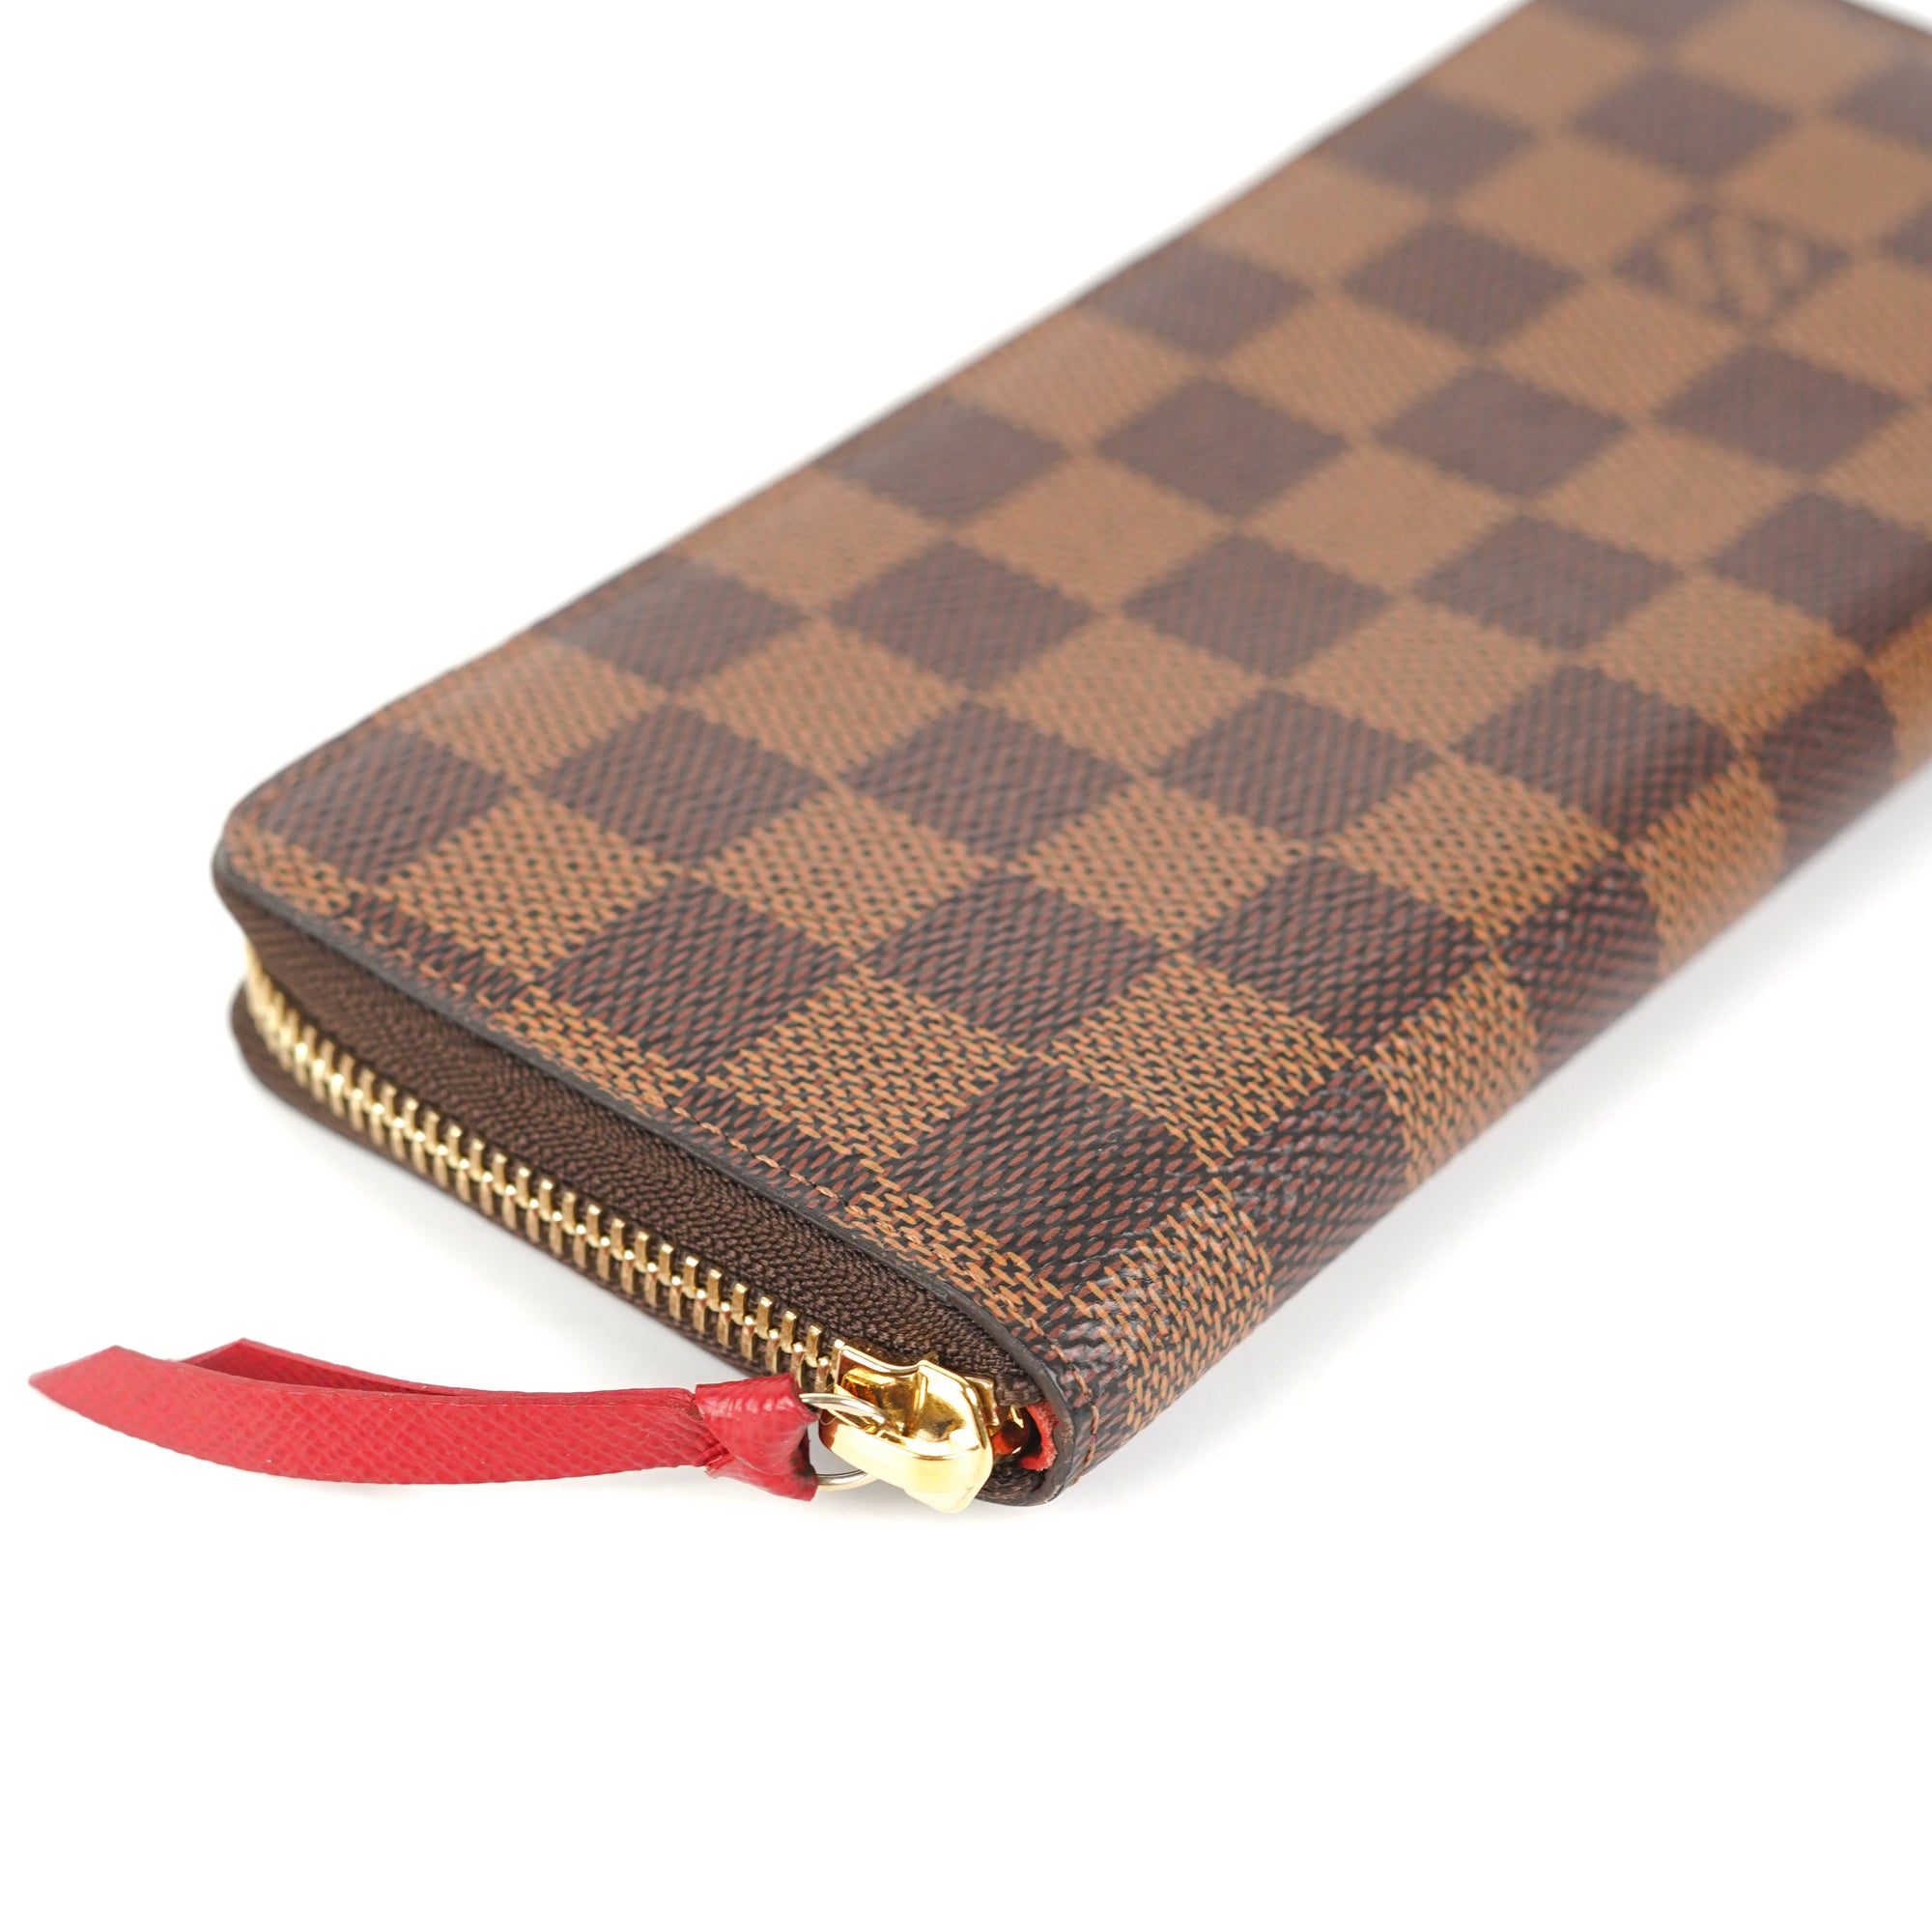 Authenticated Used Louis Vuitton Damier Azur Portefeuille Clemence N61264  Long Wallet Ladies 